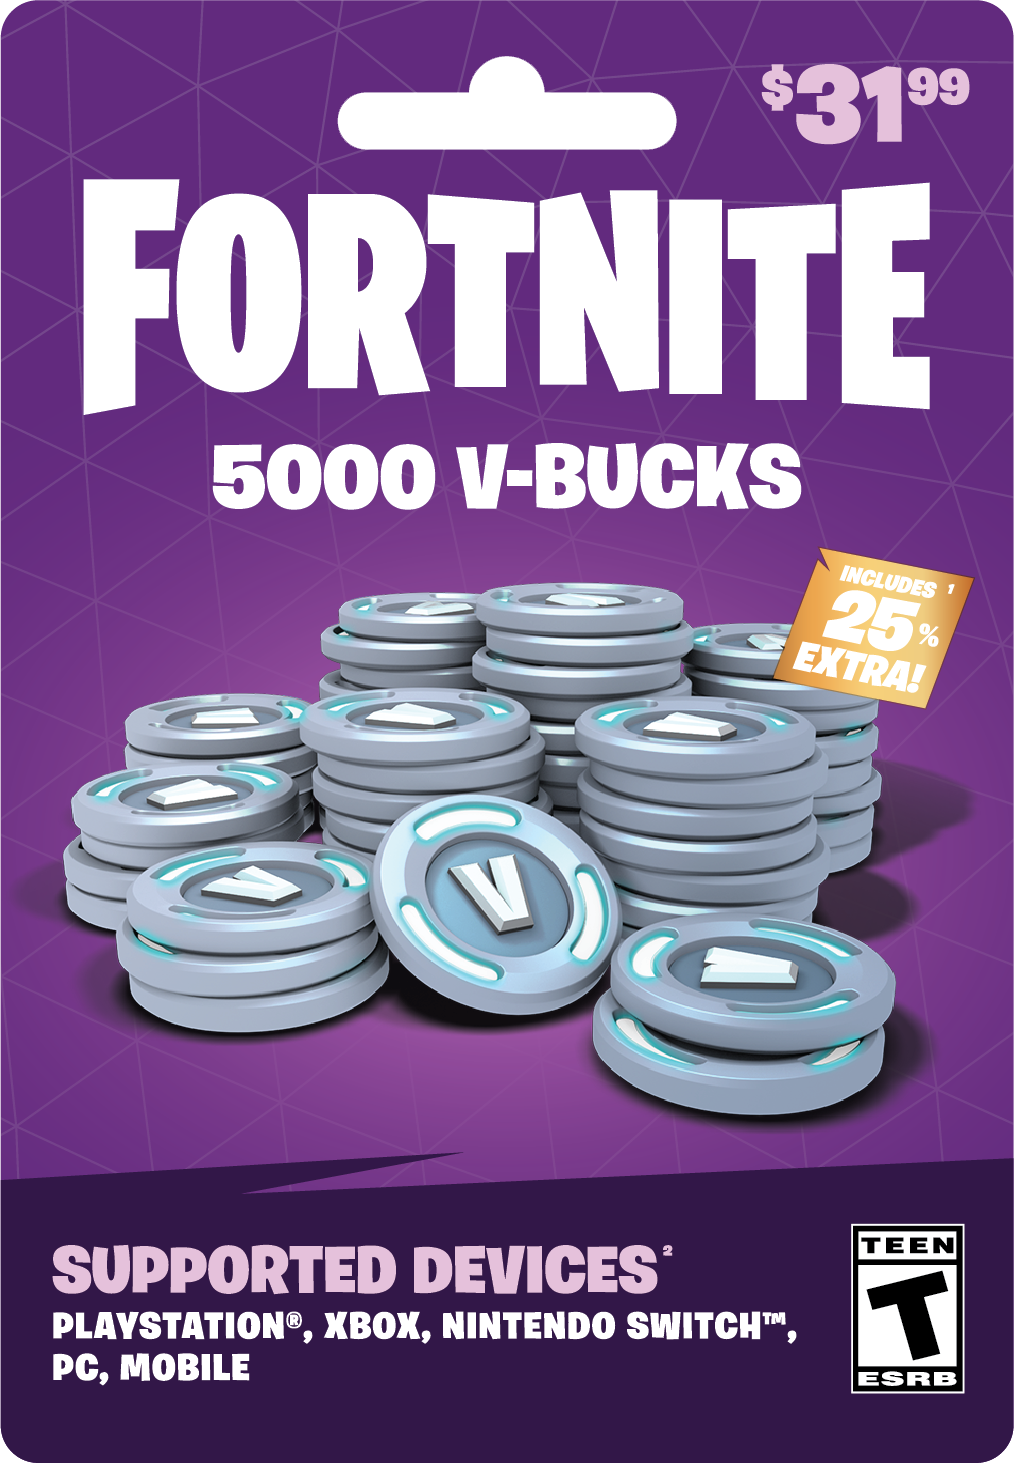 Fortnite 000 V Bucks, $31.99 Physical Card, Gearbox.com. In Game Currency, Currency Card, Xbox Gift Card